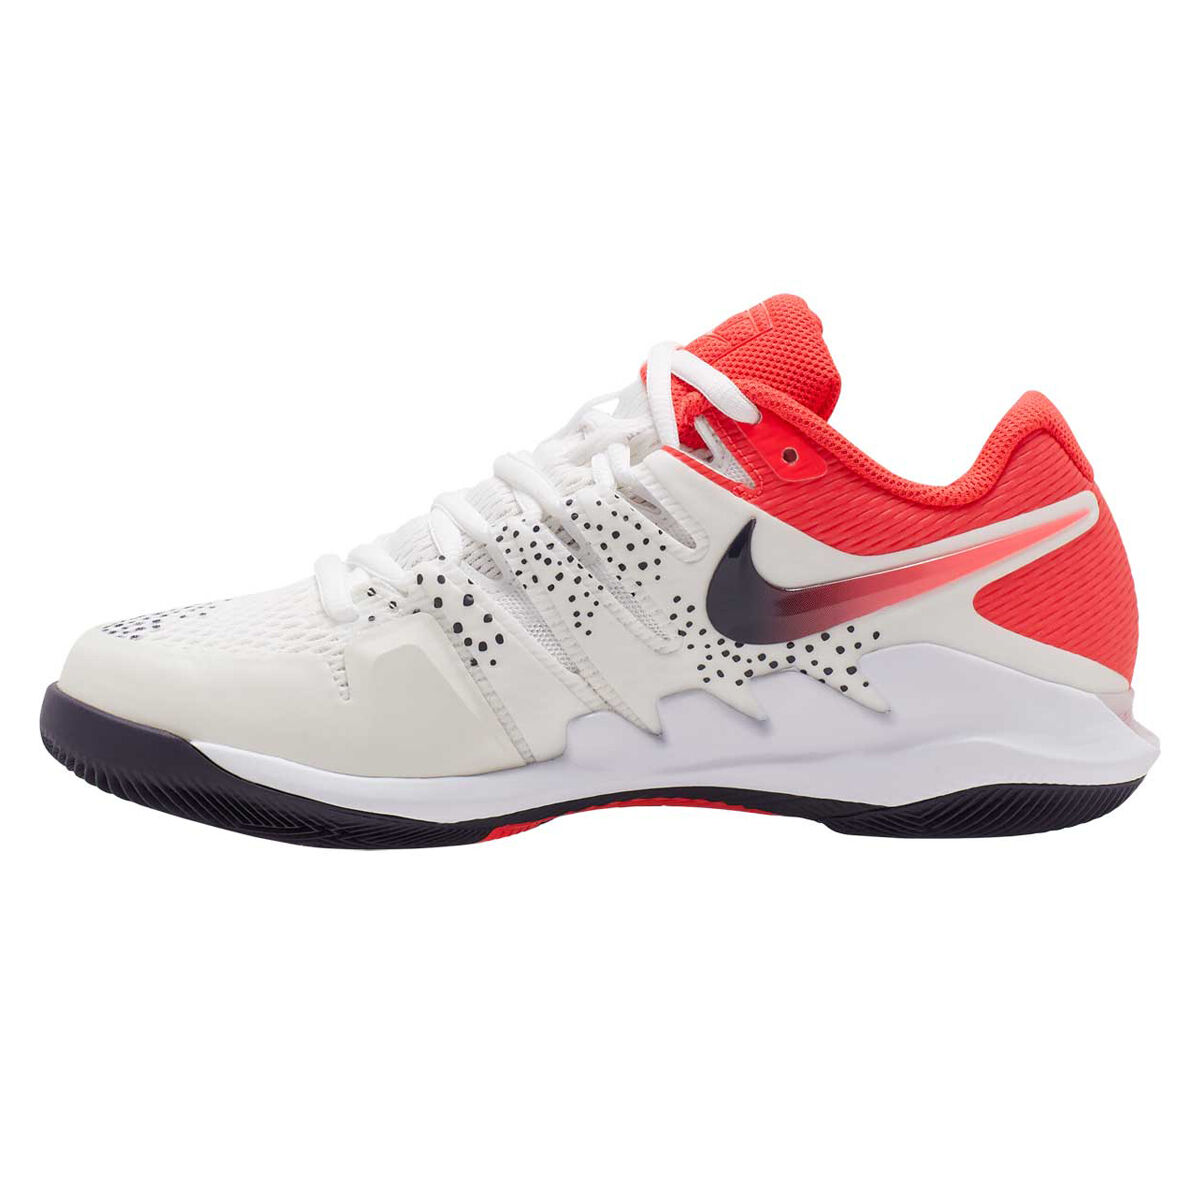 red nike tennis shoes womens